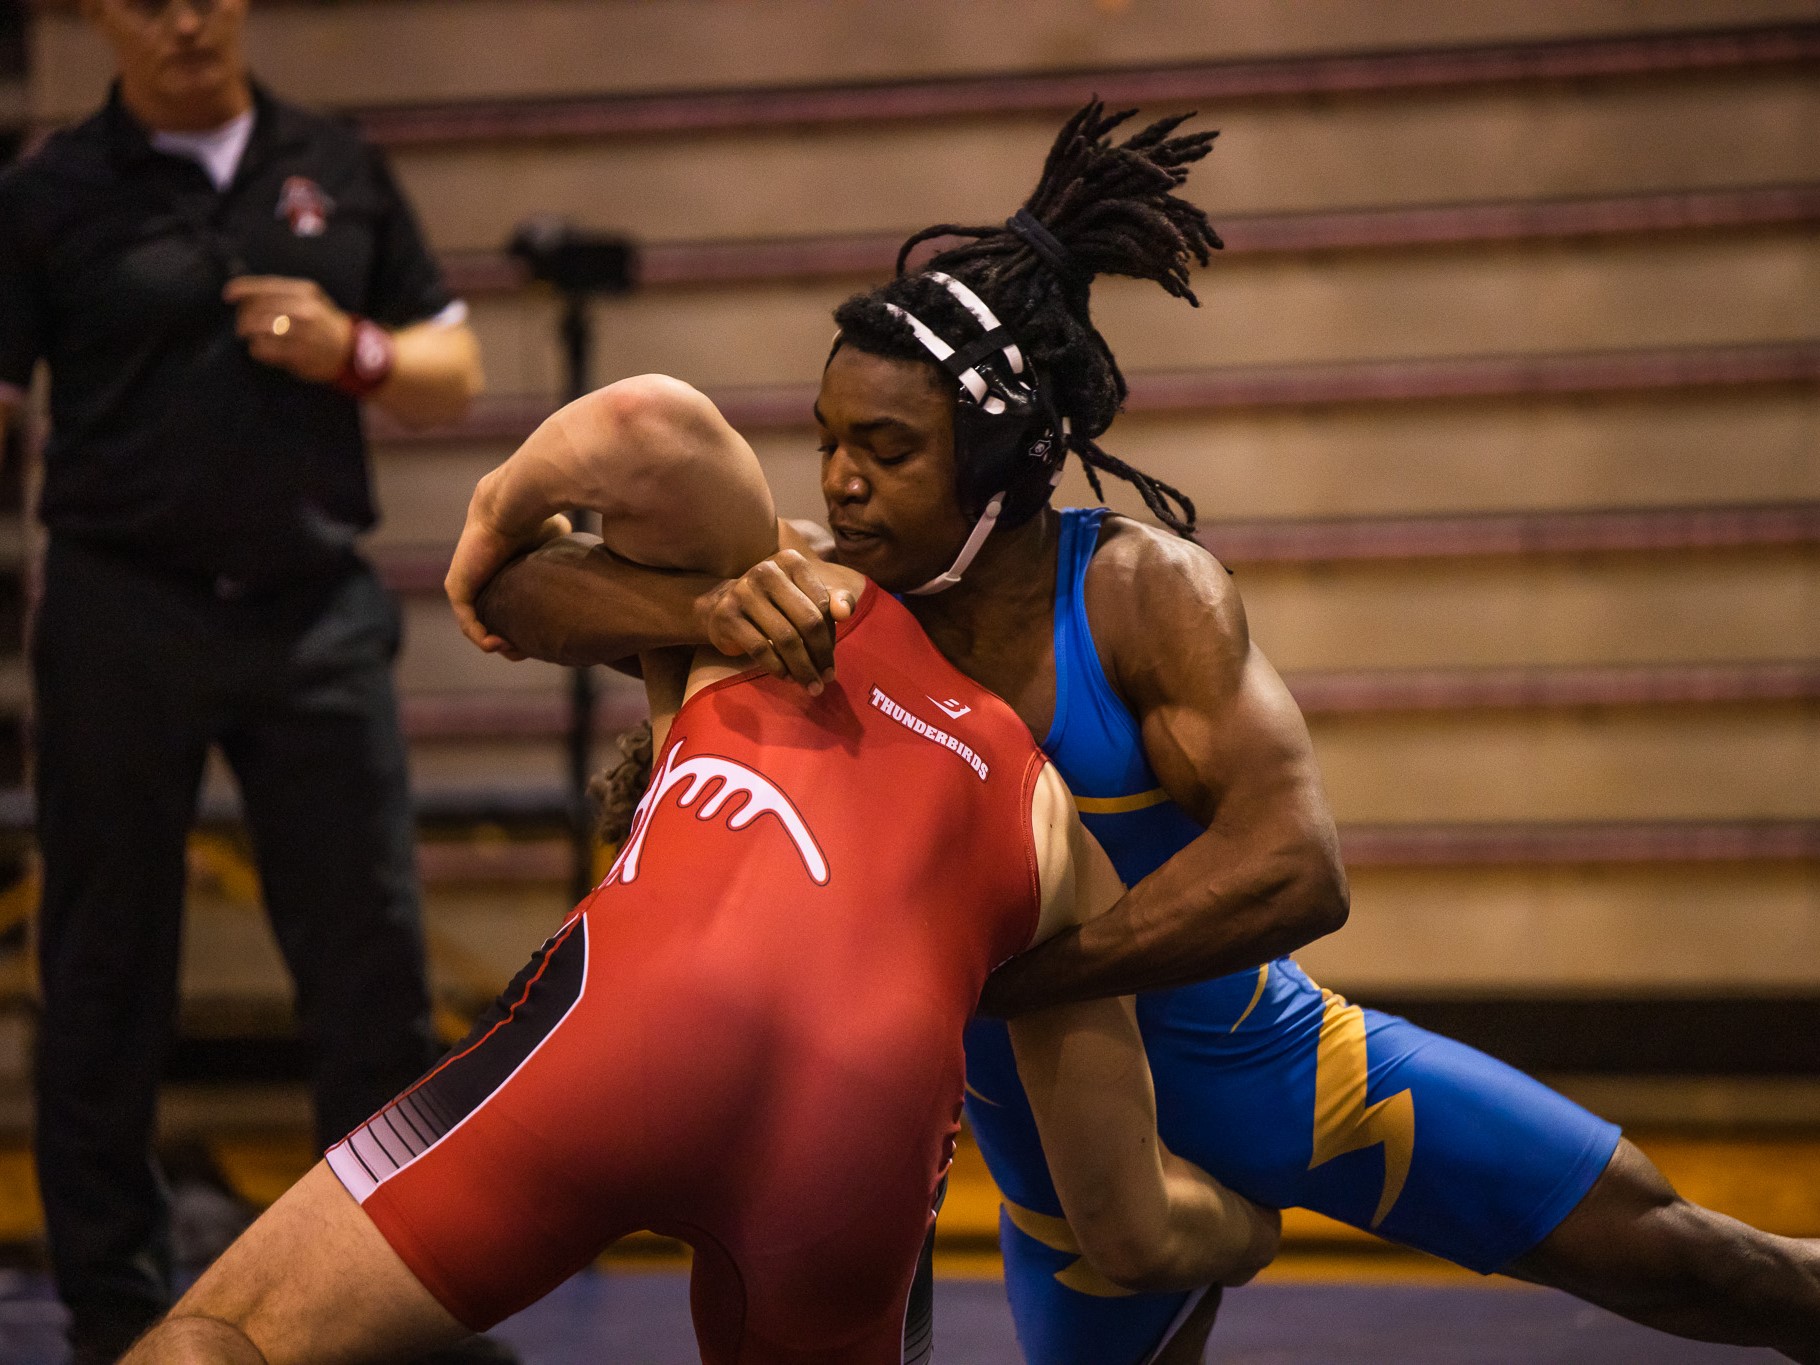 Two Rams wrestlers during a match.